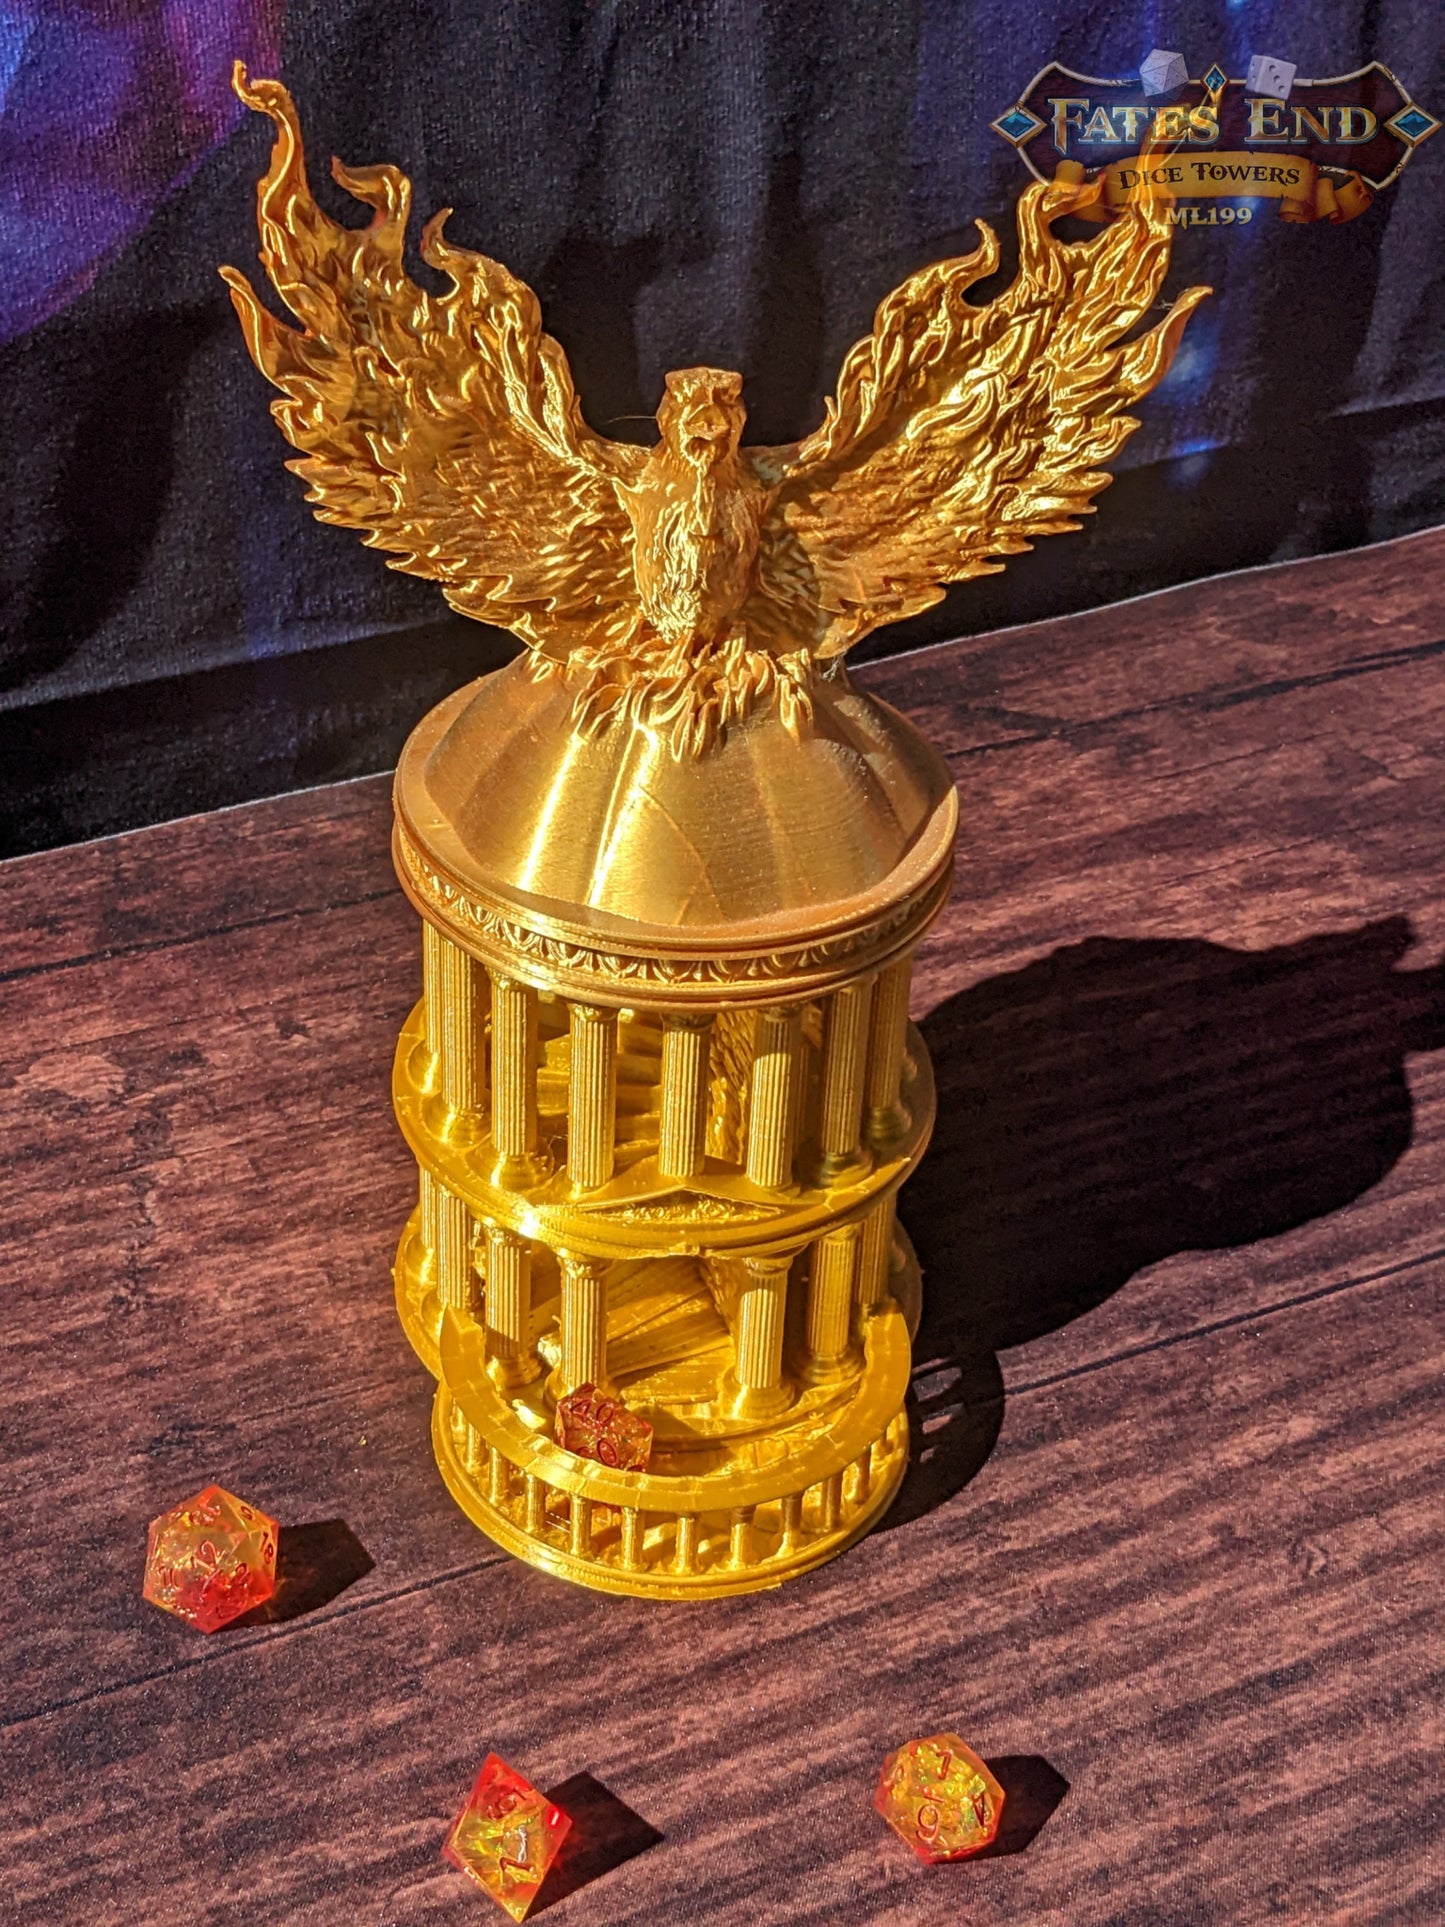 Phoenix 3D Printed Dice Tower - Fate's End Collection - Ignite Your Rolls with Flames of Rebirth and Soaring Resilience.